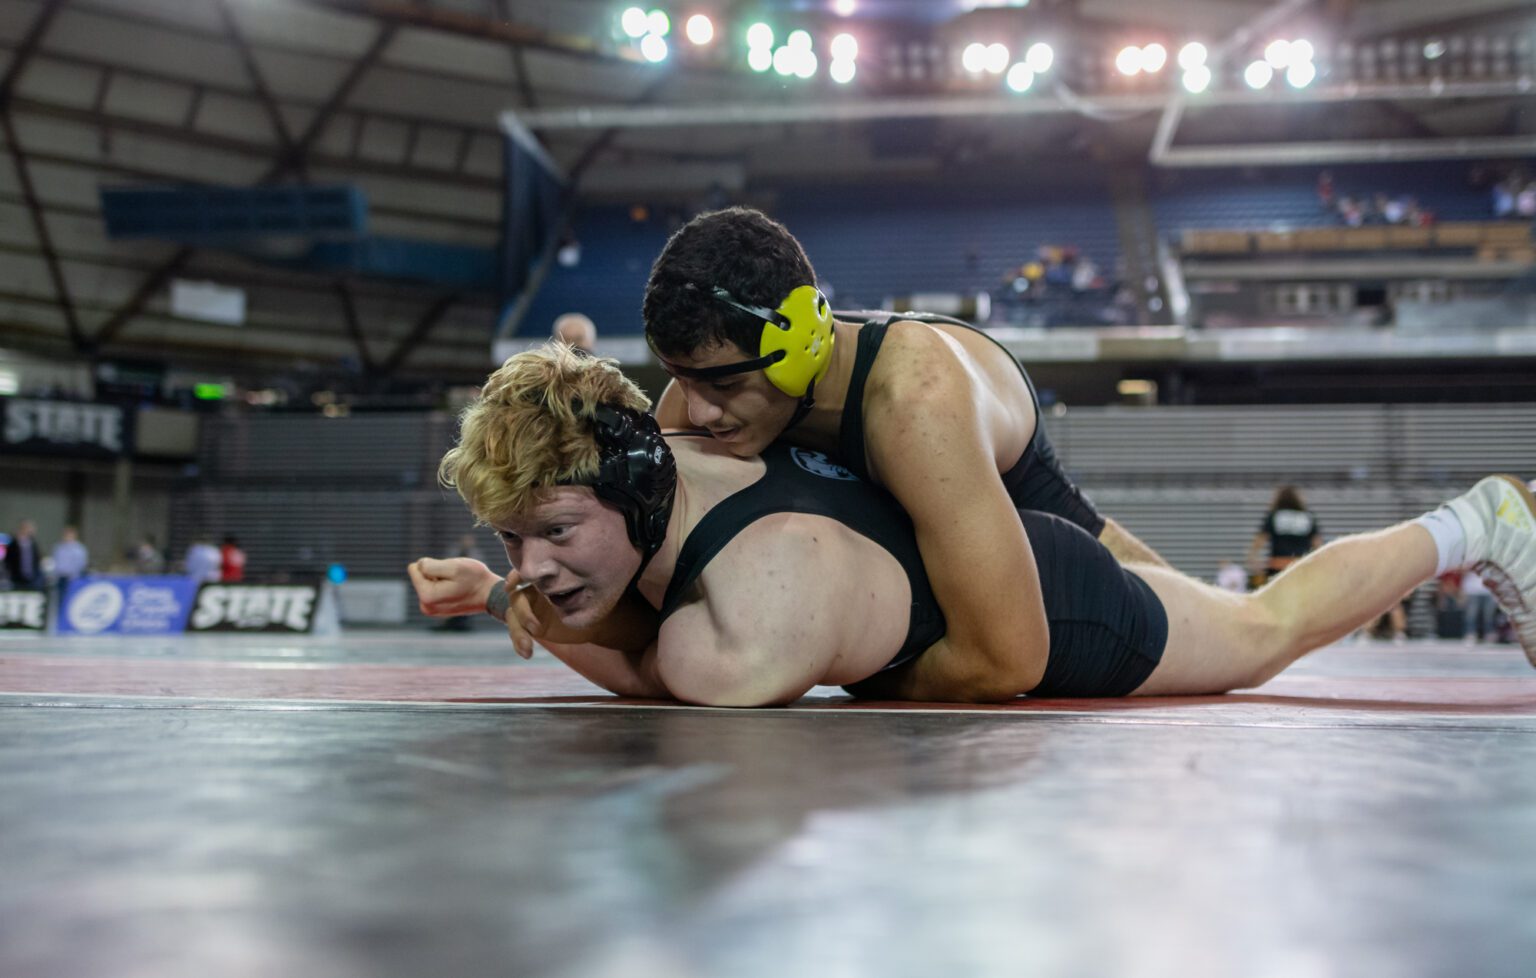 Squalicum's Bryson Lamb tries to get out from under North Kitsap's Sofian Hammou in the 220-pound championship at Mat Classic XXXIII on Saturday at the Tacoma Dome.